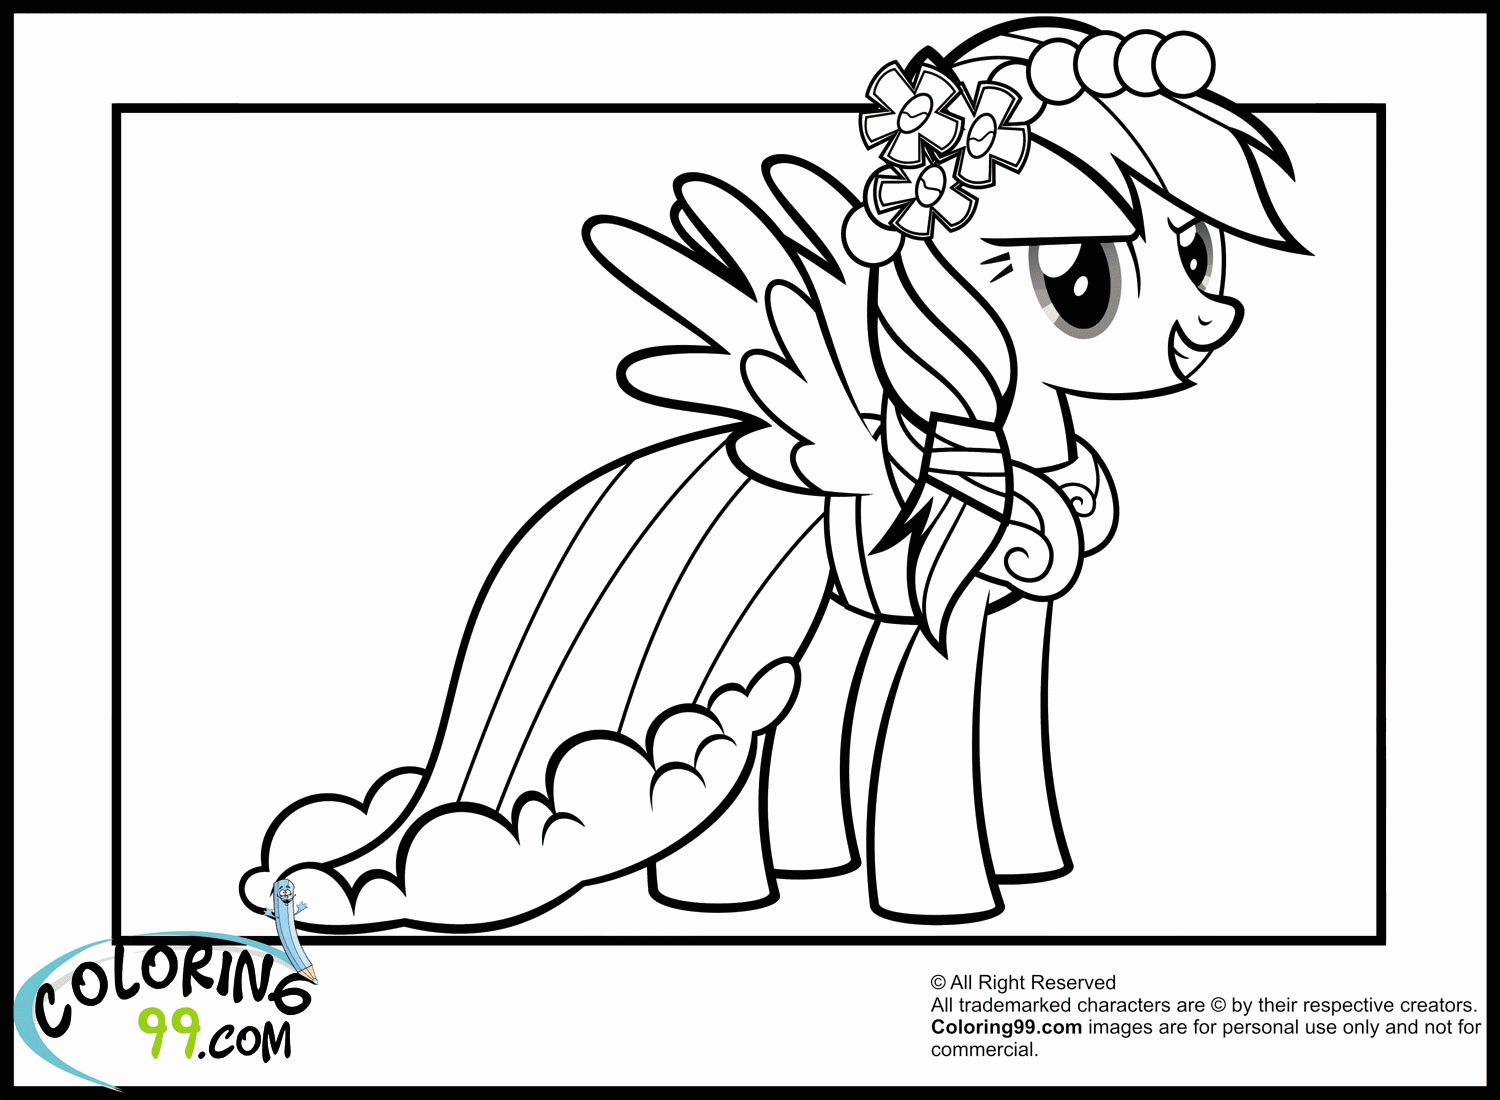 Coloring Pictures Of Rainbow Dash - High Quality Coloring Pages